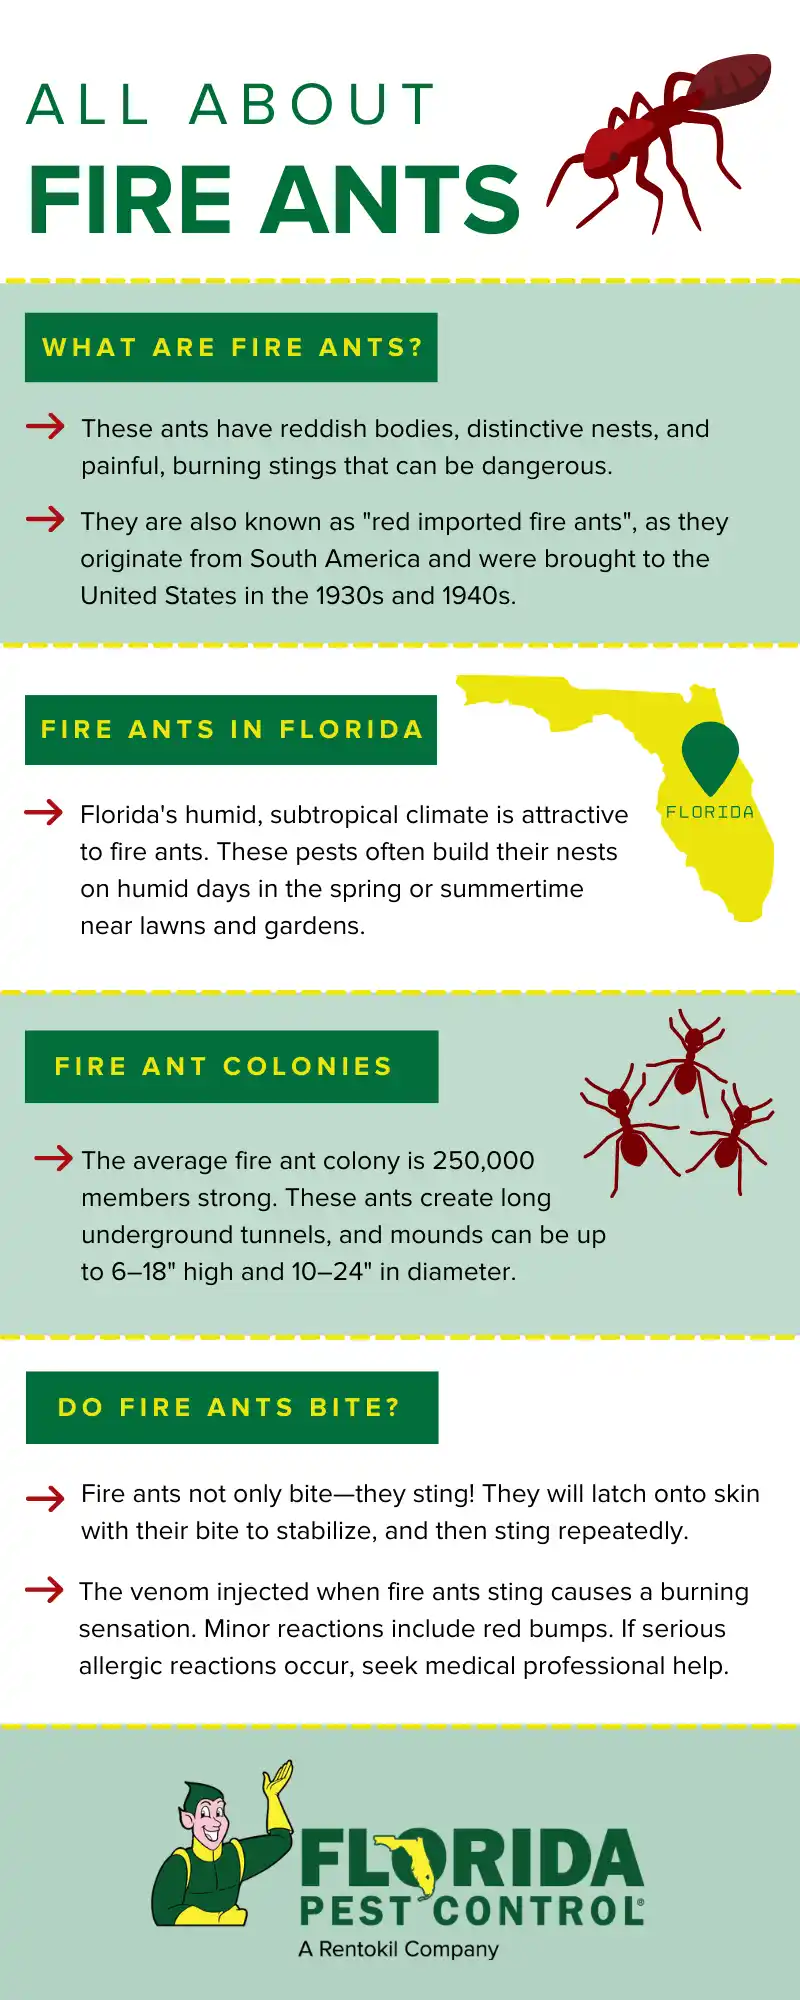 Fire ant infographic in Florida - Florida Pest Control